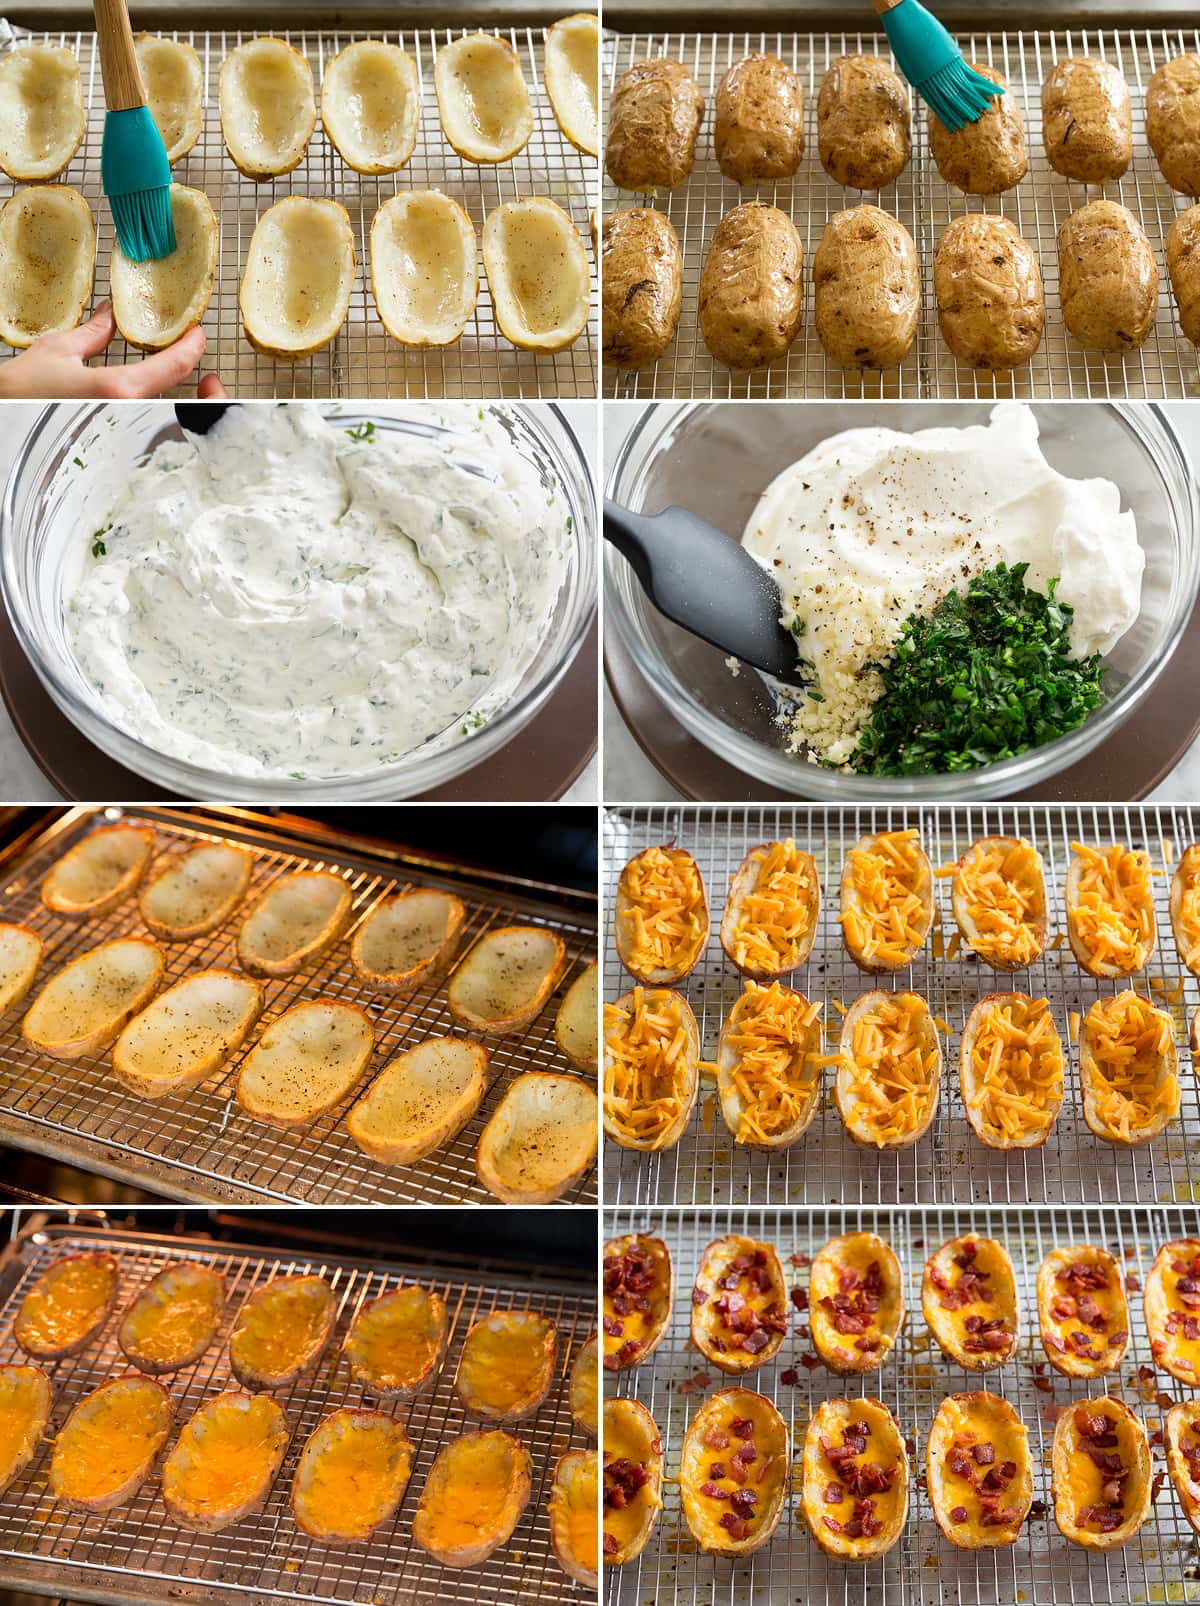 Collage of eight photos showing how to finish potato skins. Includes brushing both sides with rendered bacon fat. Mixing herbed sour cream ingredients. Baking the skins, filling with cheddar and bacon again. Then last finished with bacon.